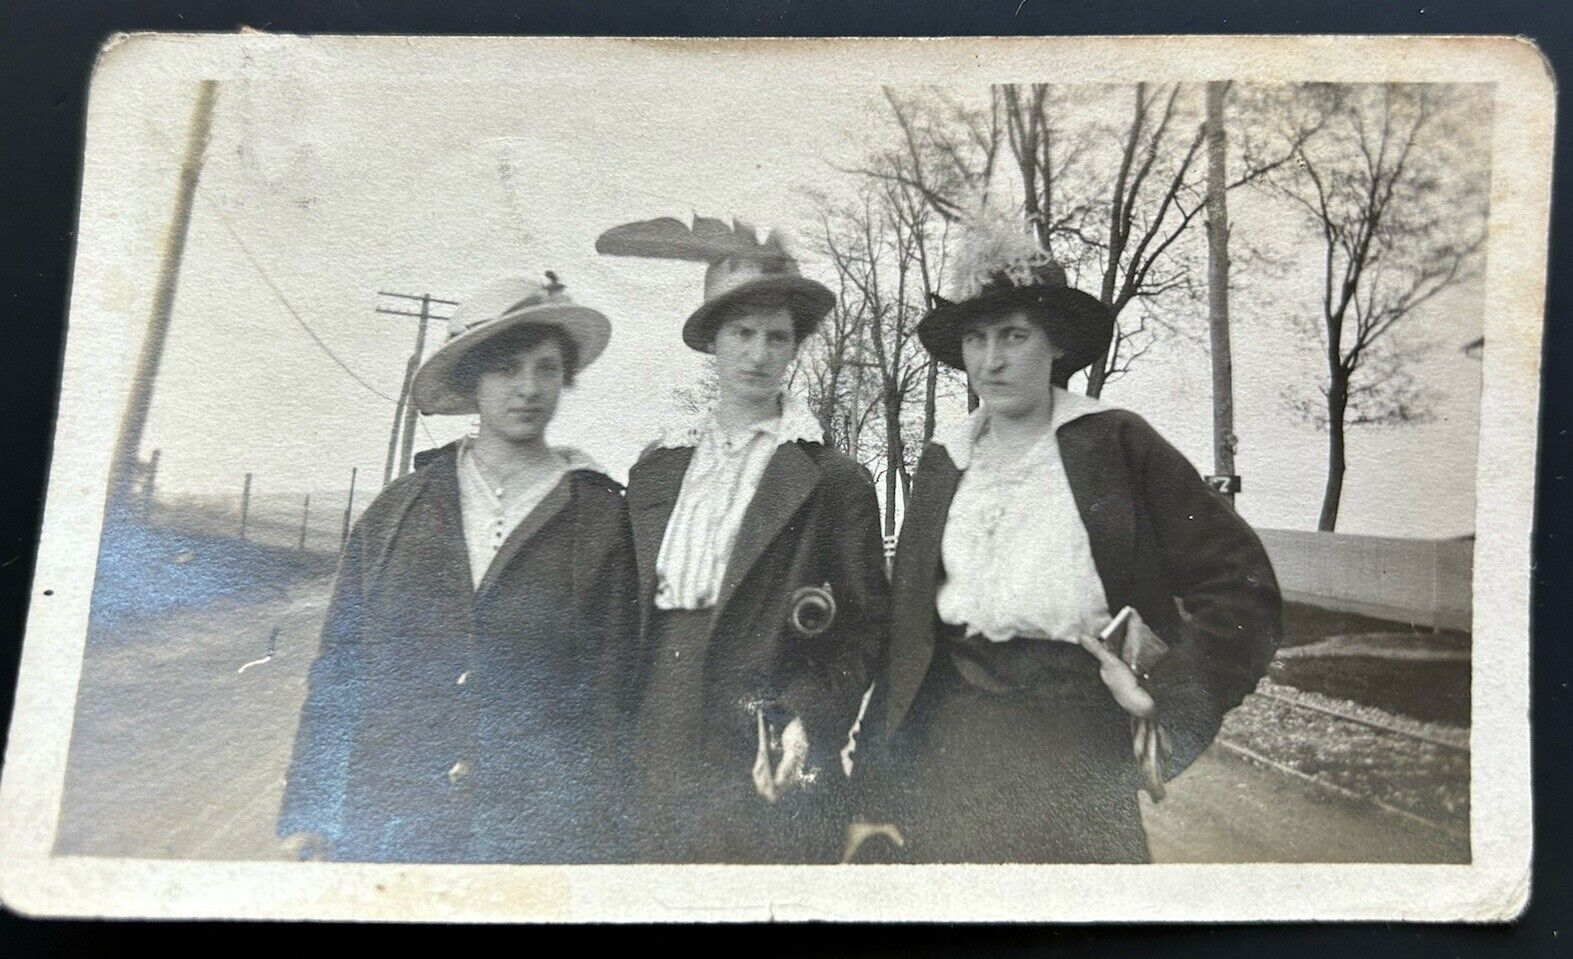 Antique Photo Snapshot 1920s? Of Young Women With Funky Feather Hats